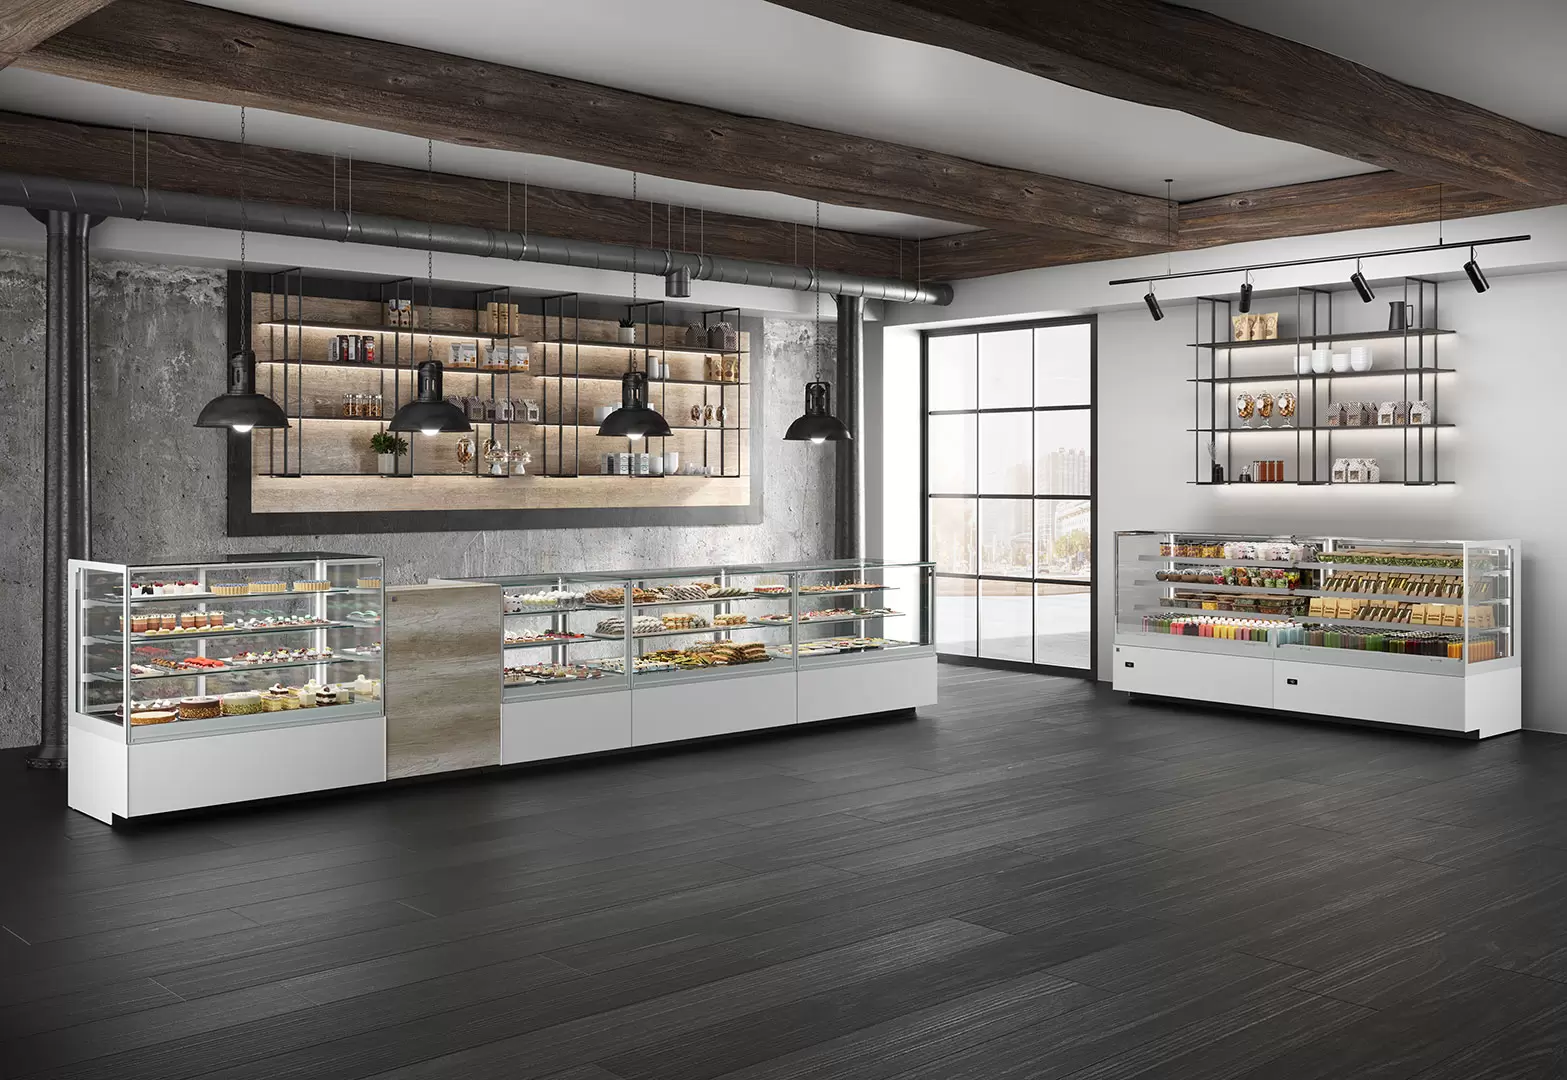 ifi-lilium-refrigerated-display-cabinets-for-food-deli (1)